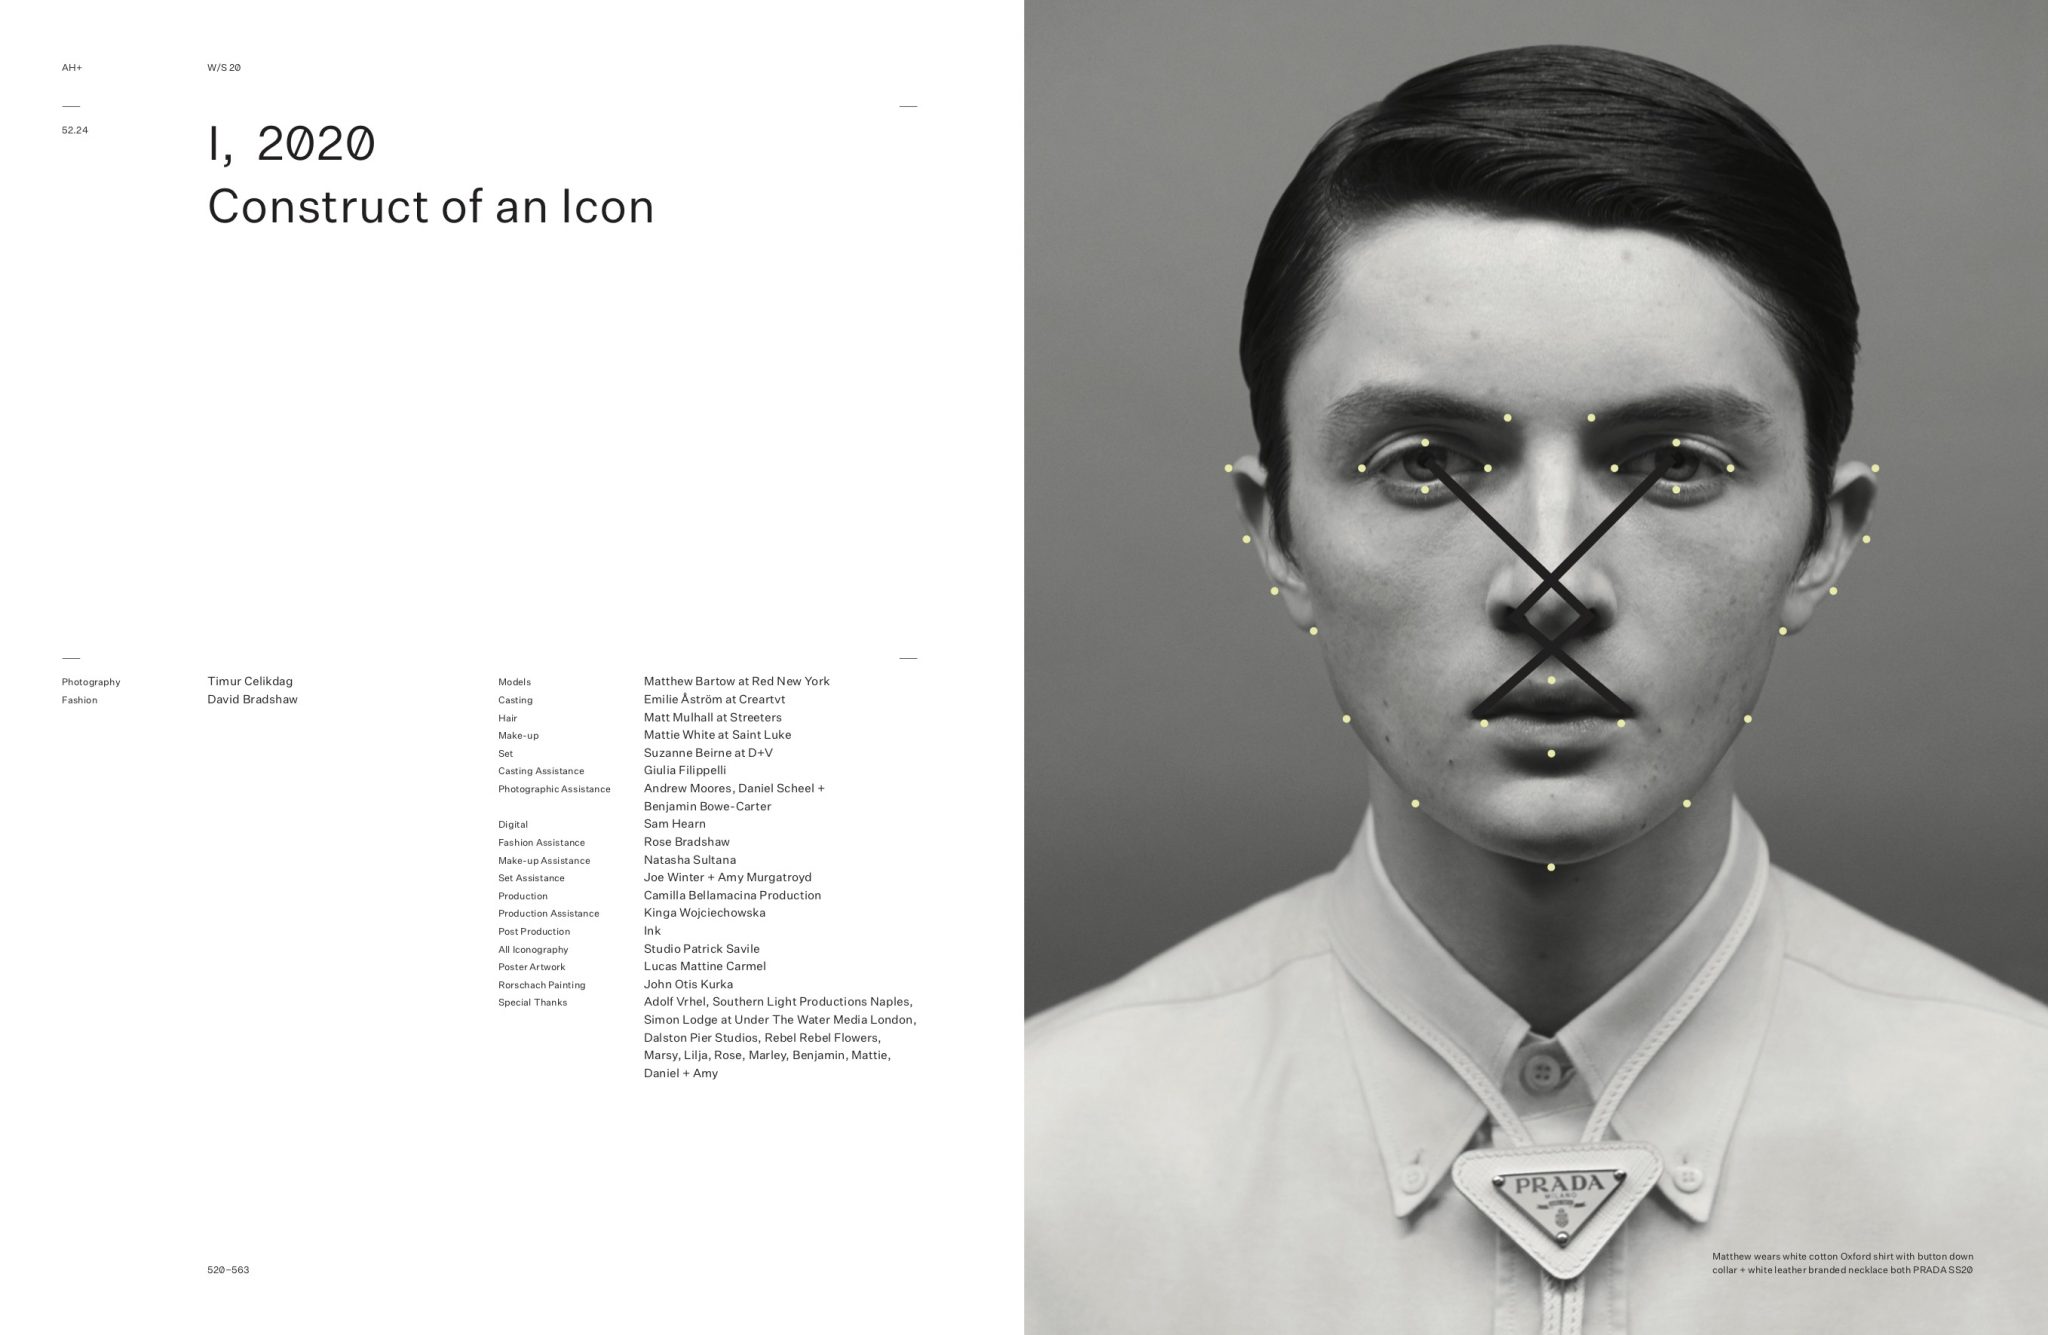 David Bradshaw | Arena Homme +: Construct of an Icon | 1